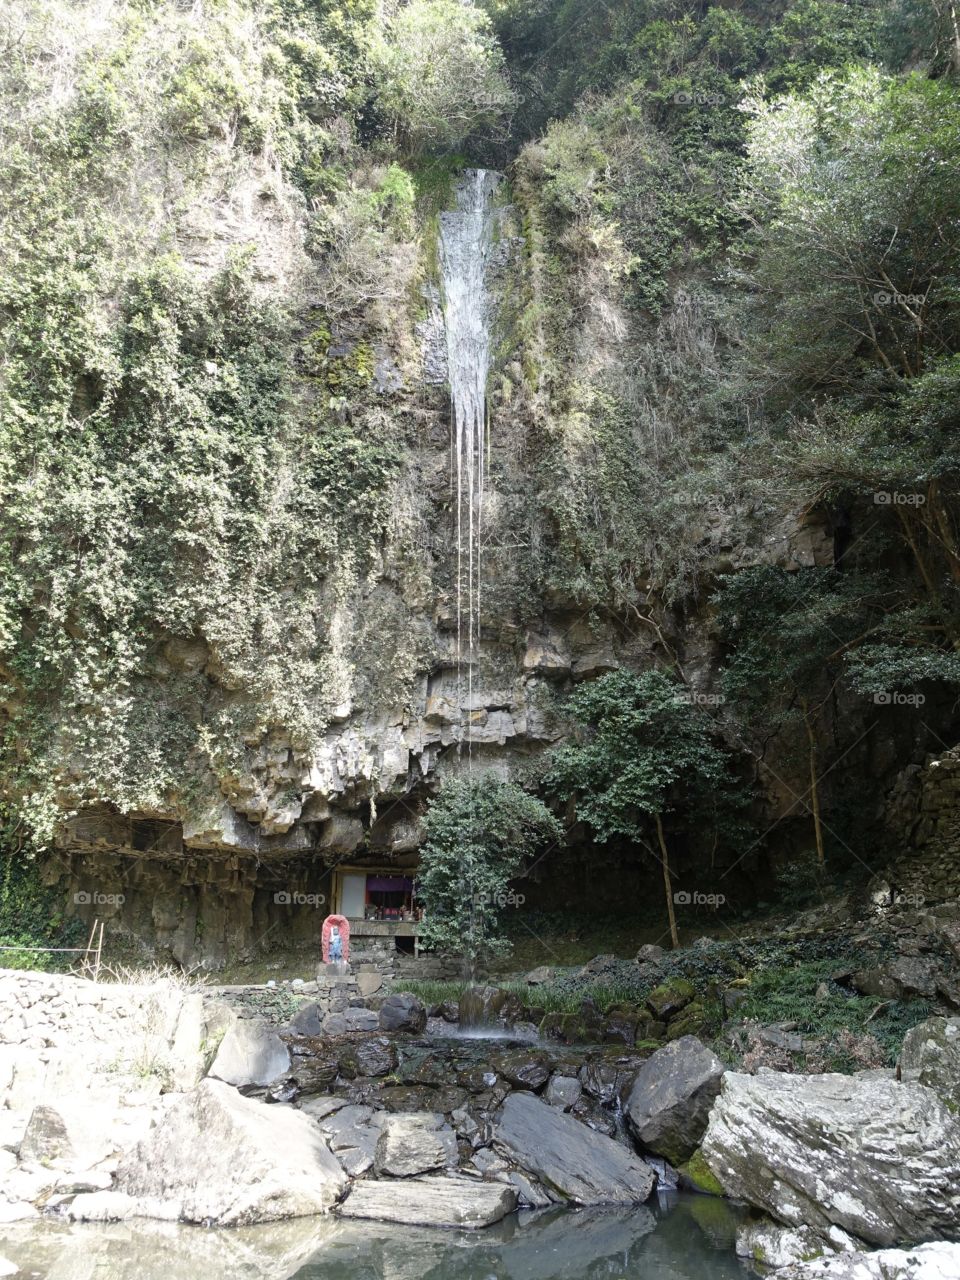 A small waterfall in the canyon